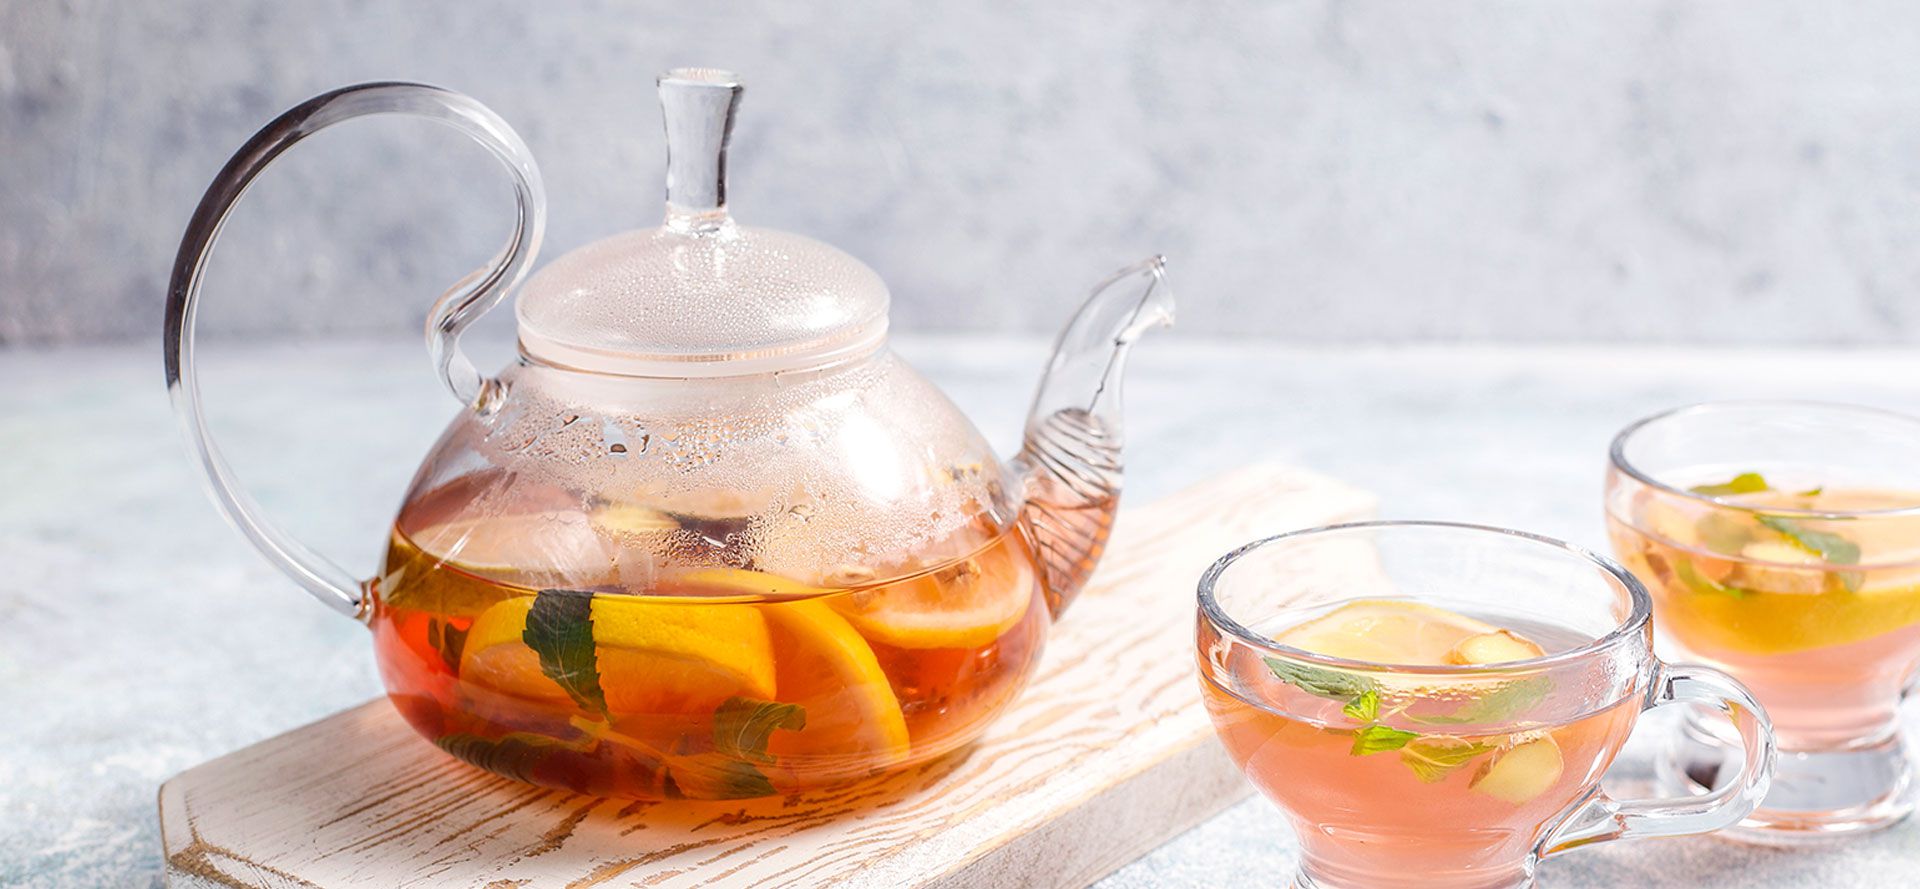 Glass Teapot With Brewed Tea. 